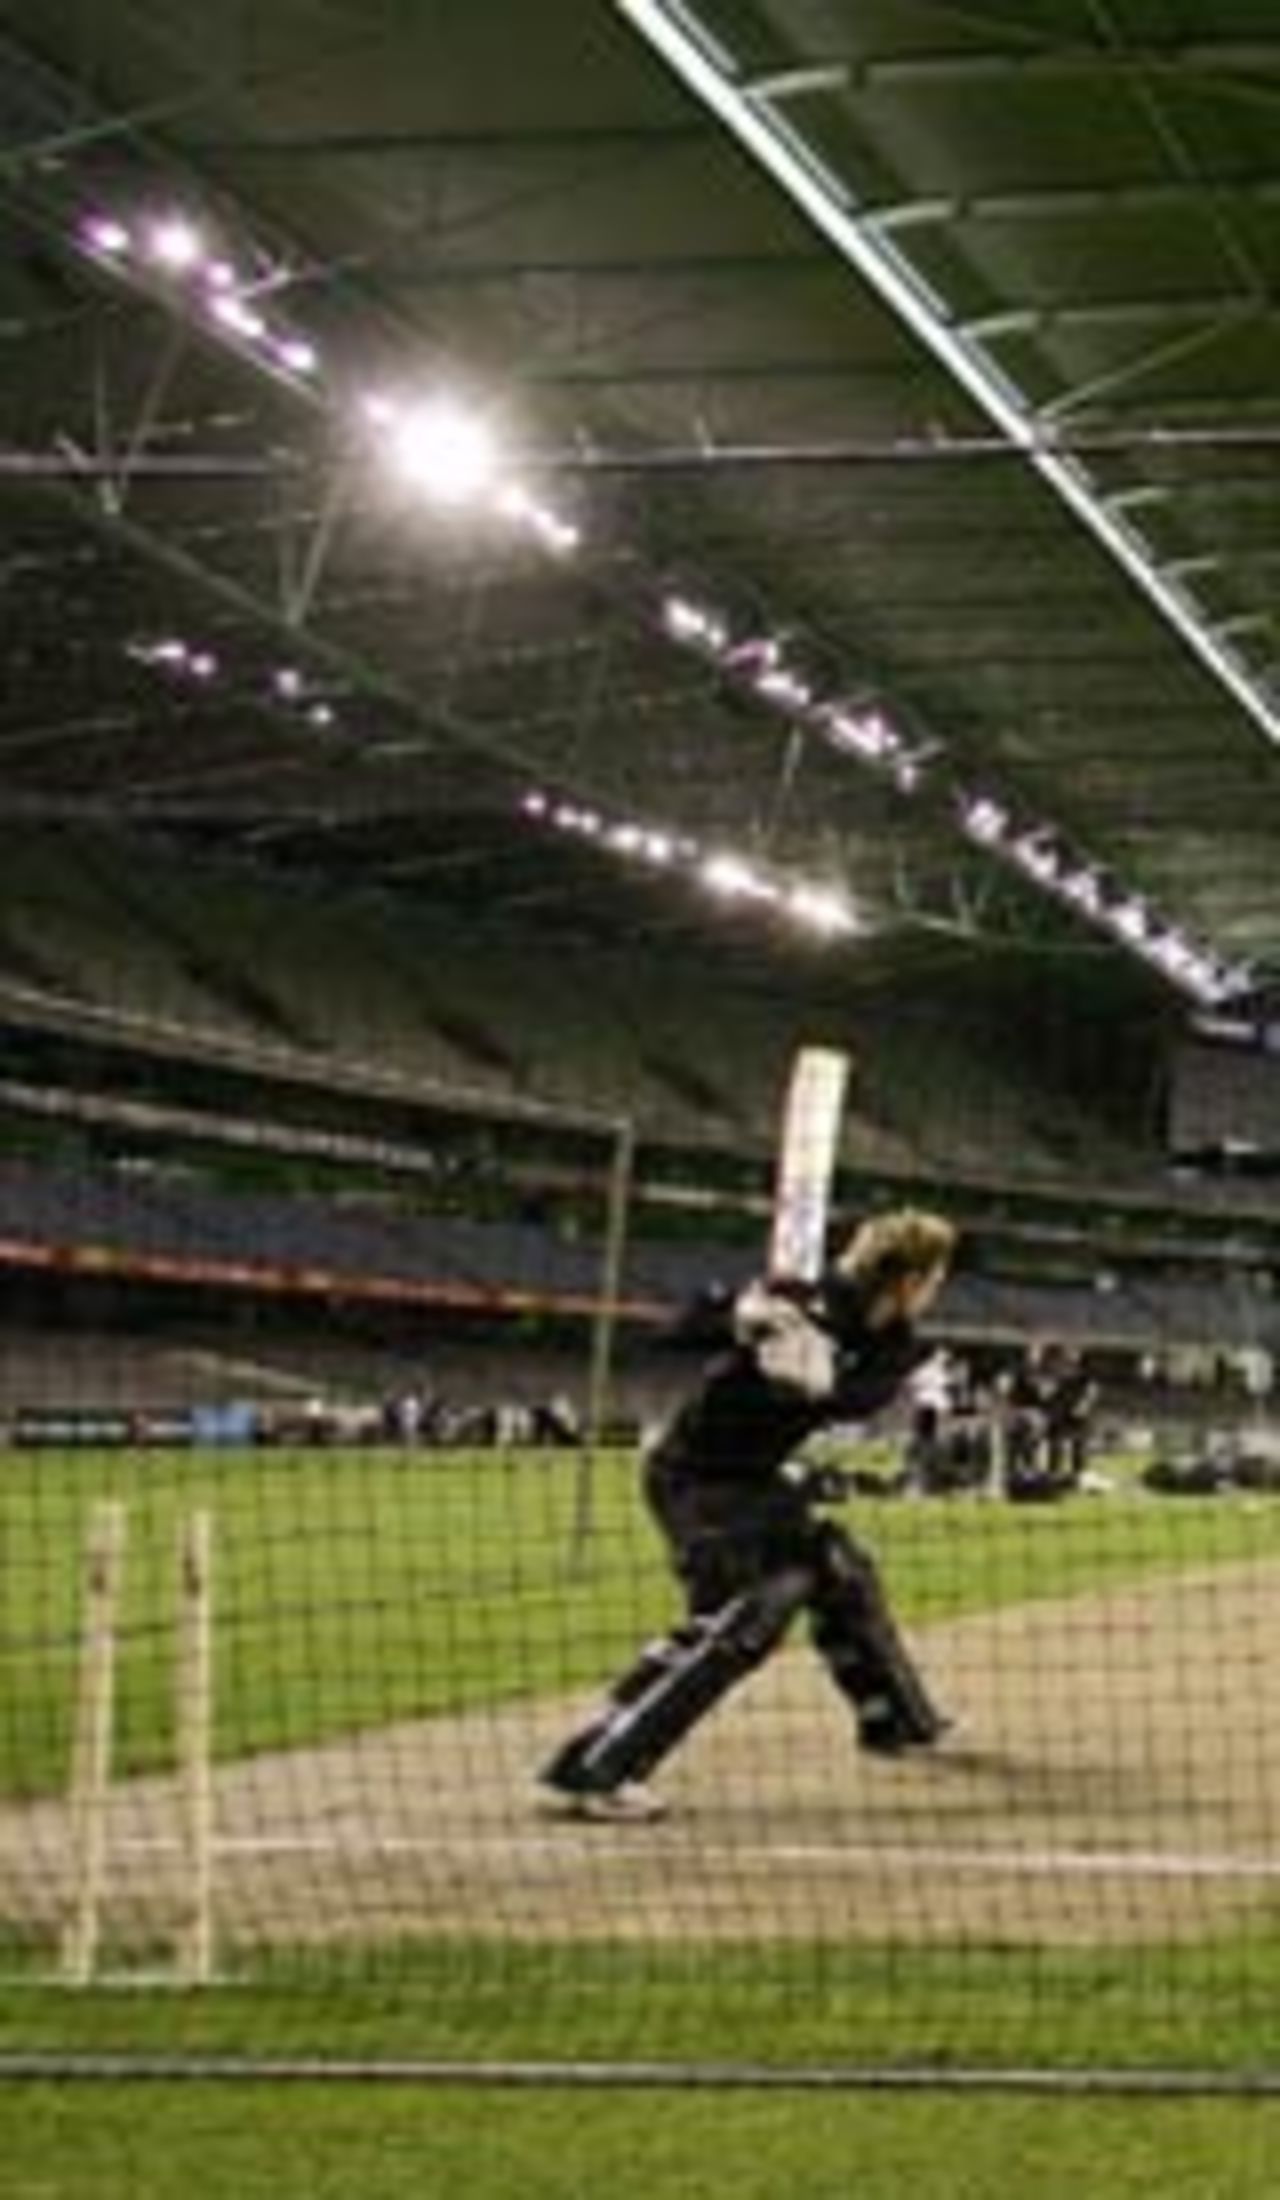 A New Zealand batsman has a hit in the nets under lights ahead of the Chappell-Hadlee series, Melbourne, December 3 2004